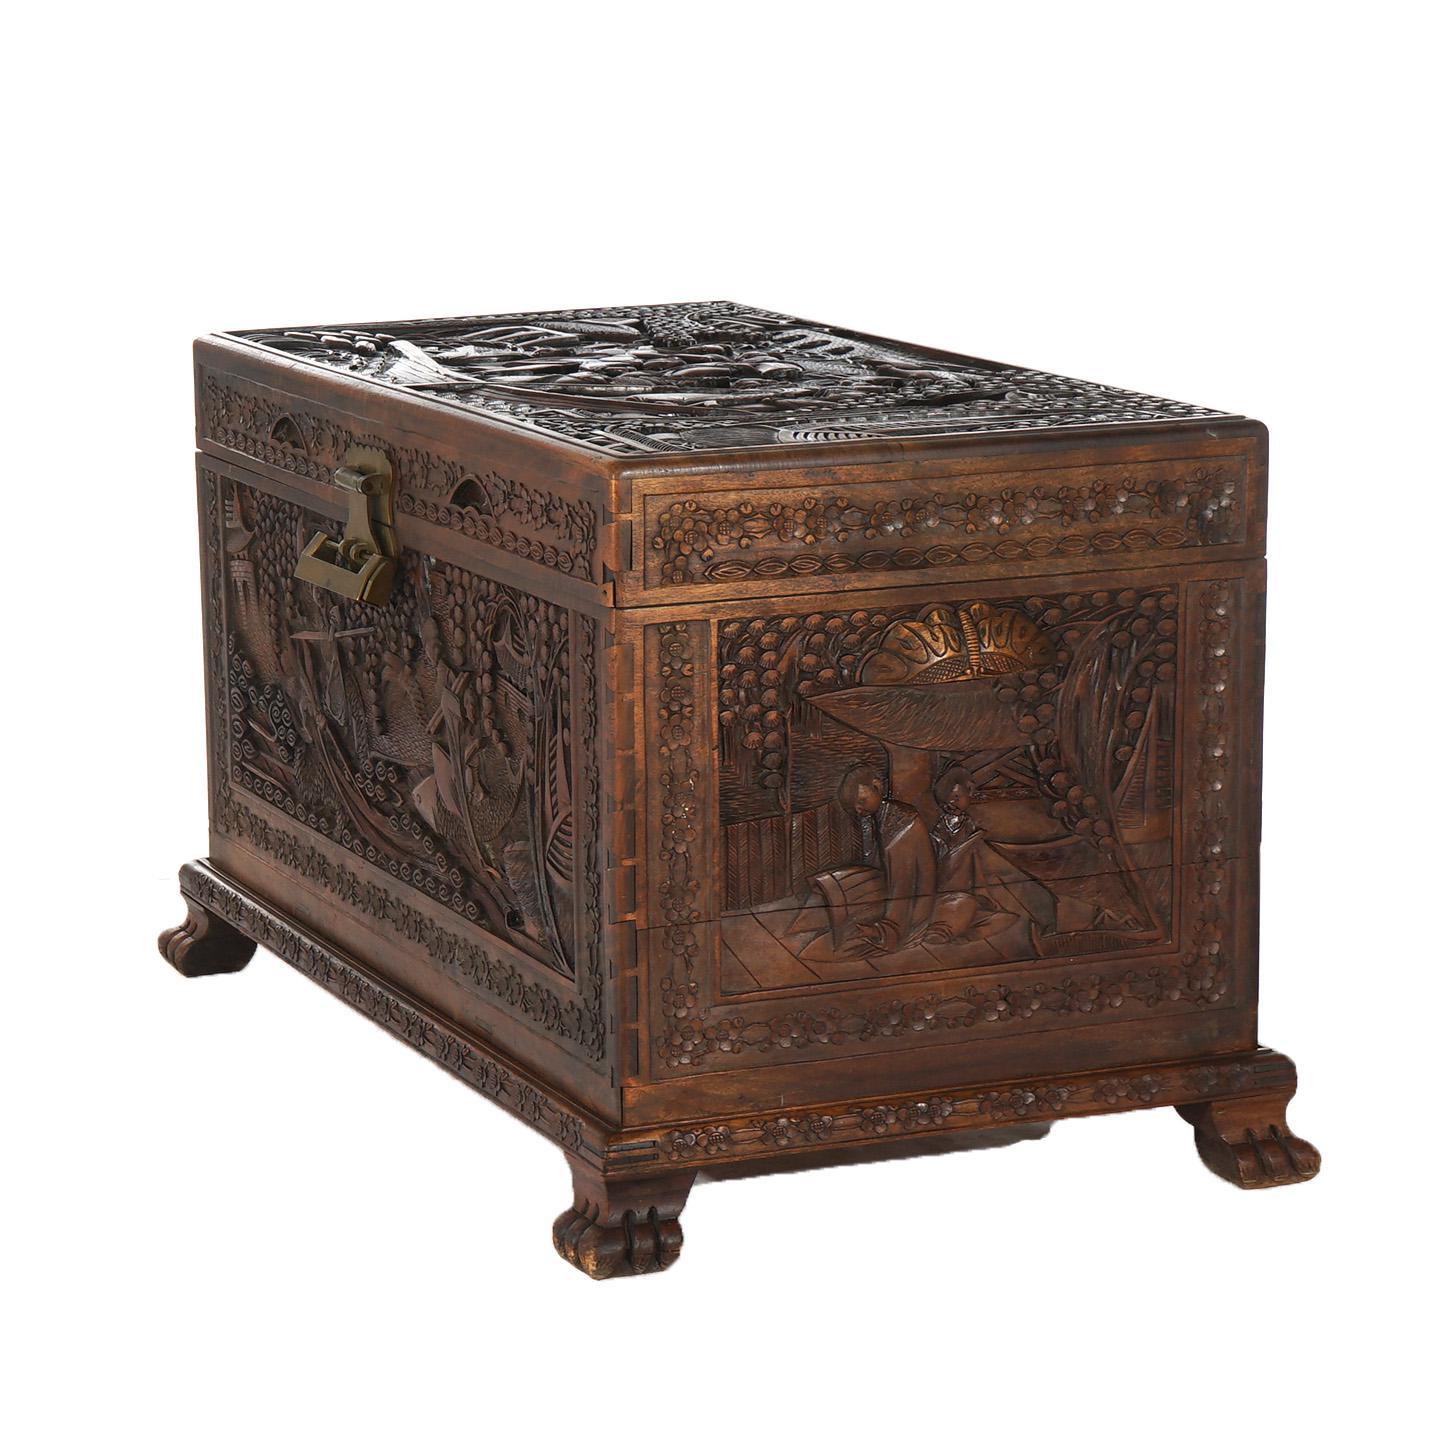 Antique Chinese Hardwood Carved in Relief Chinoiserie Blanket Chest Chest C1920 For Sale 2